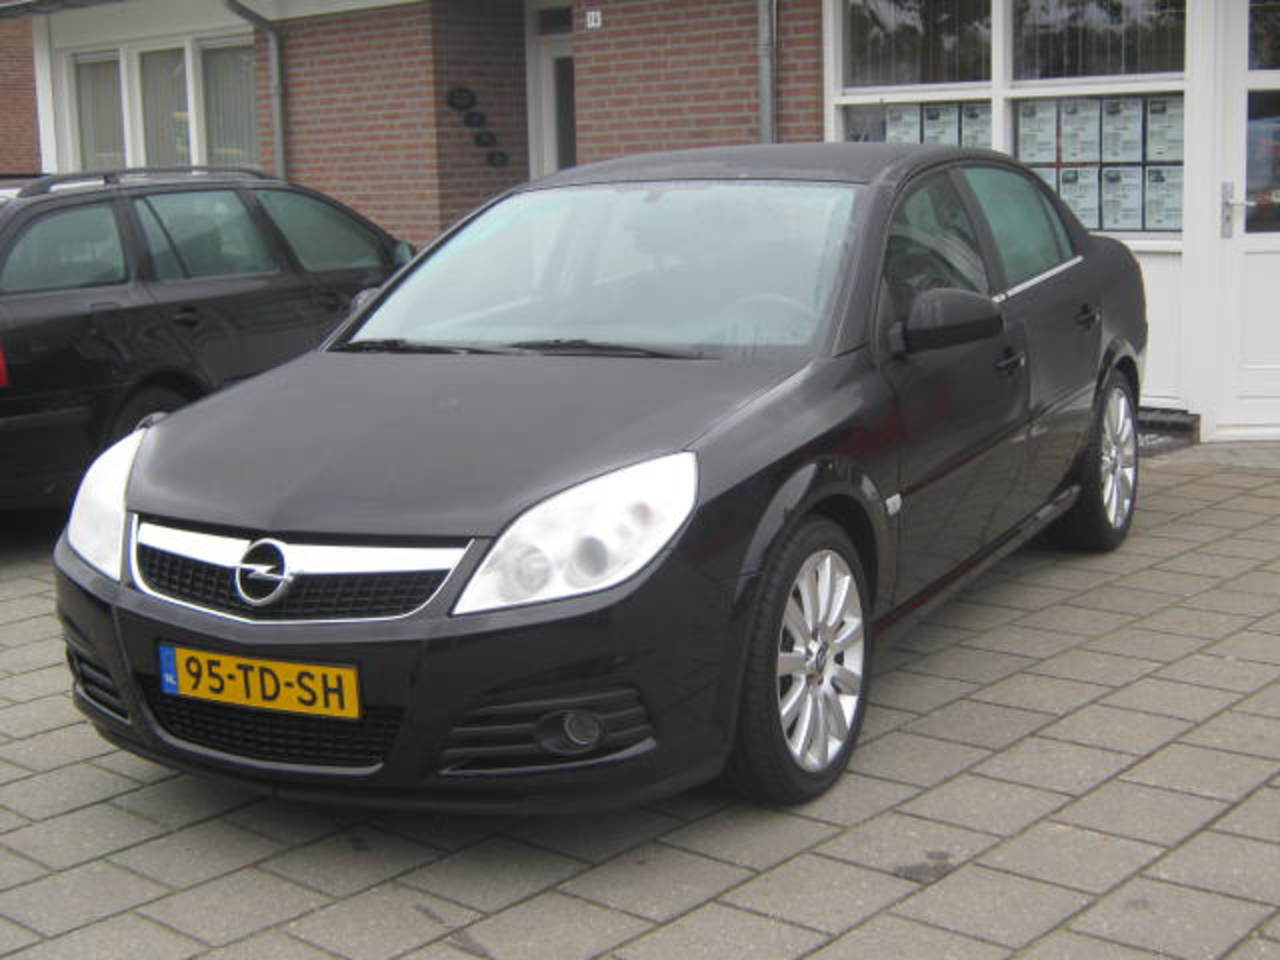 Opel Vectra CD 18 16V. View Download Wallpaper. 640x480. Comments